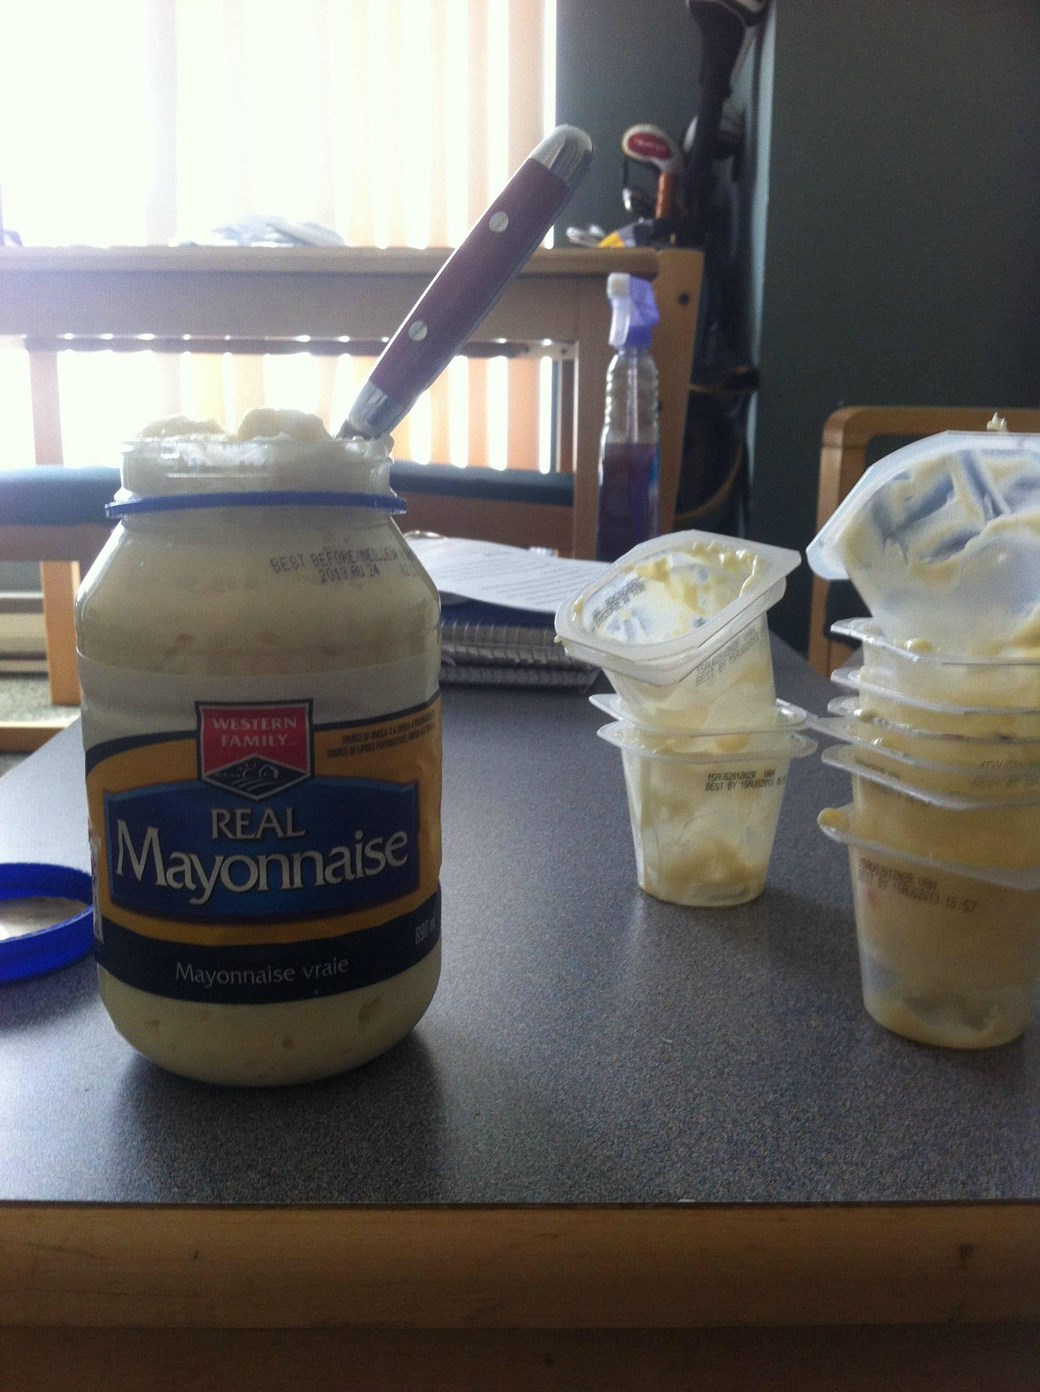 12. Replace mayo with pudding